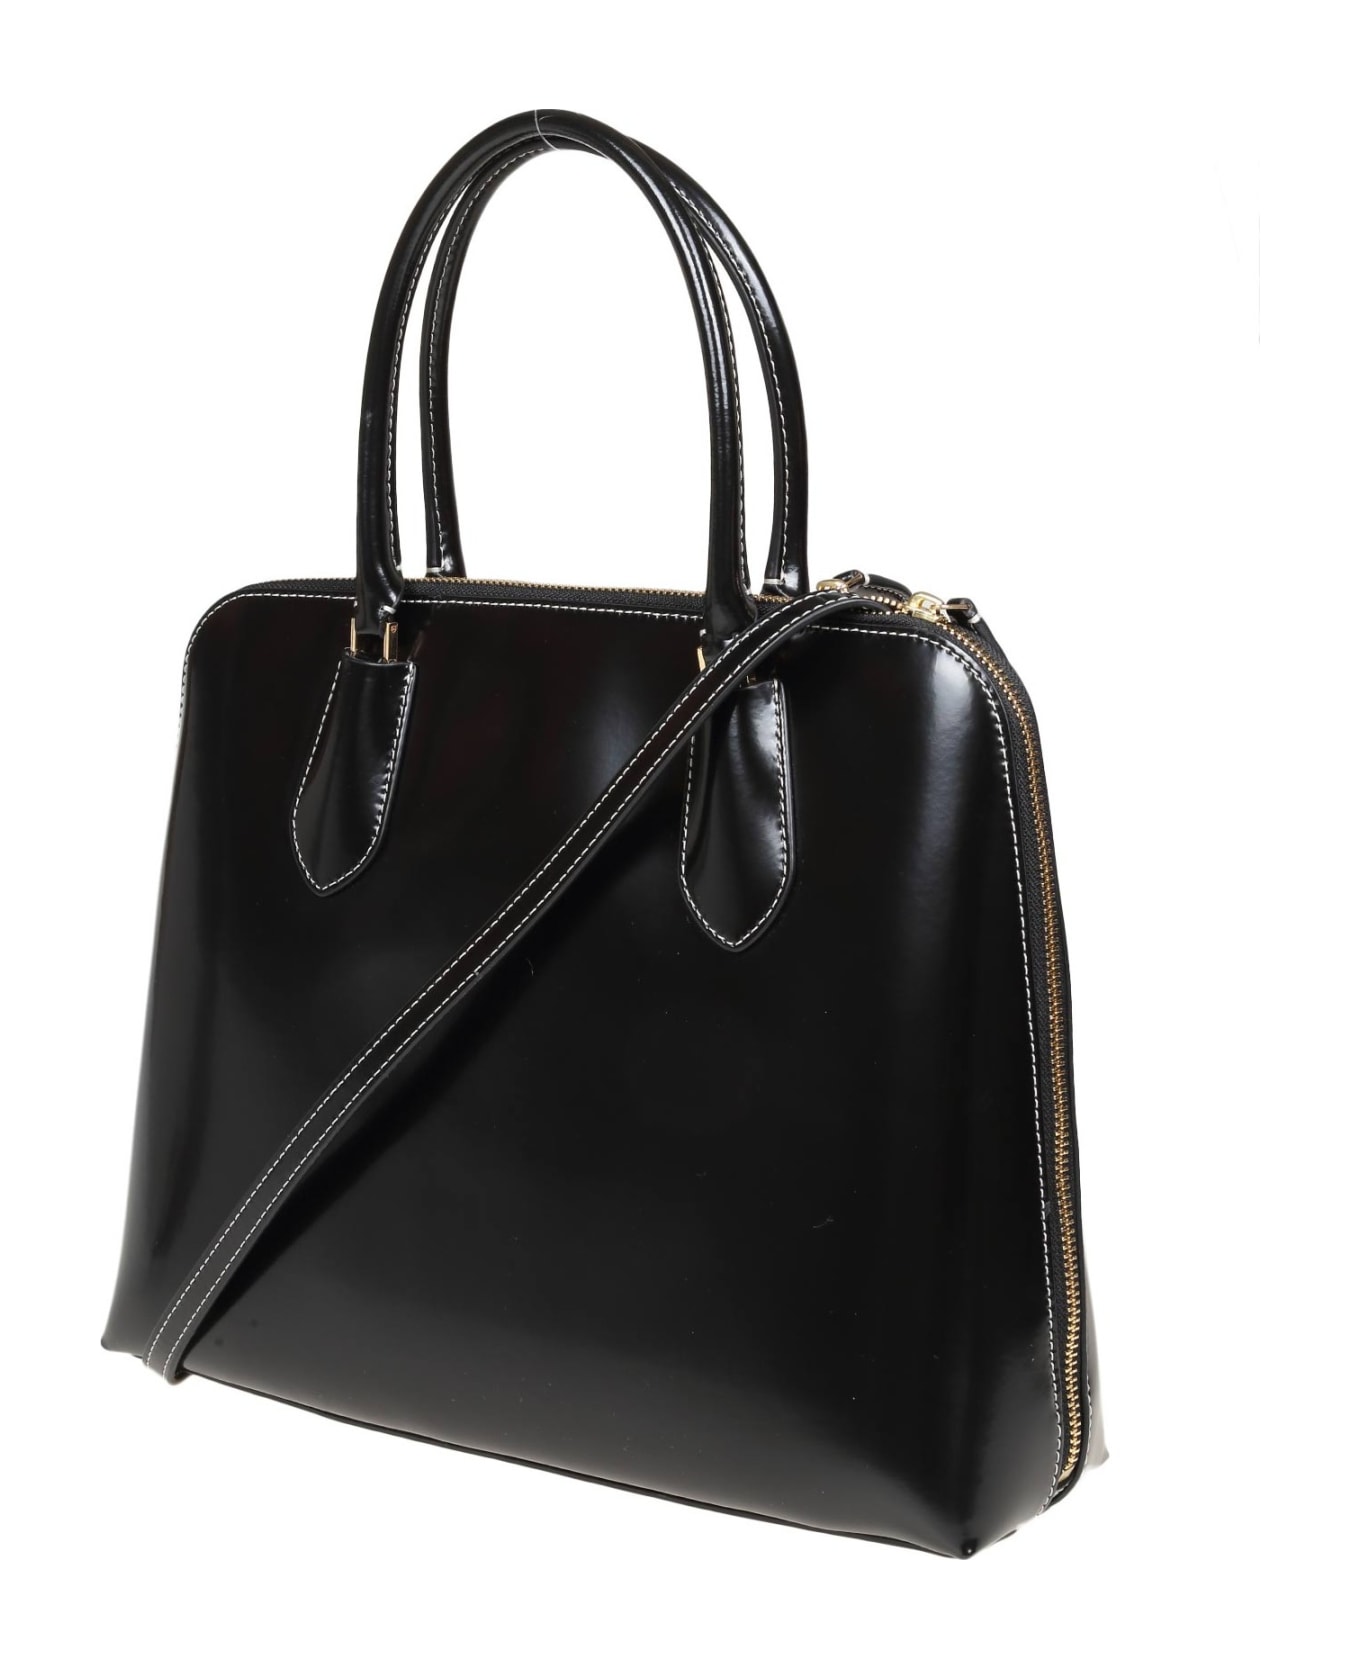 Tory Burch Swing Bag In Black Brushed Leather - Black トートバッグ